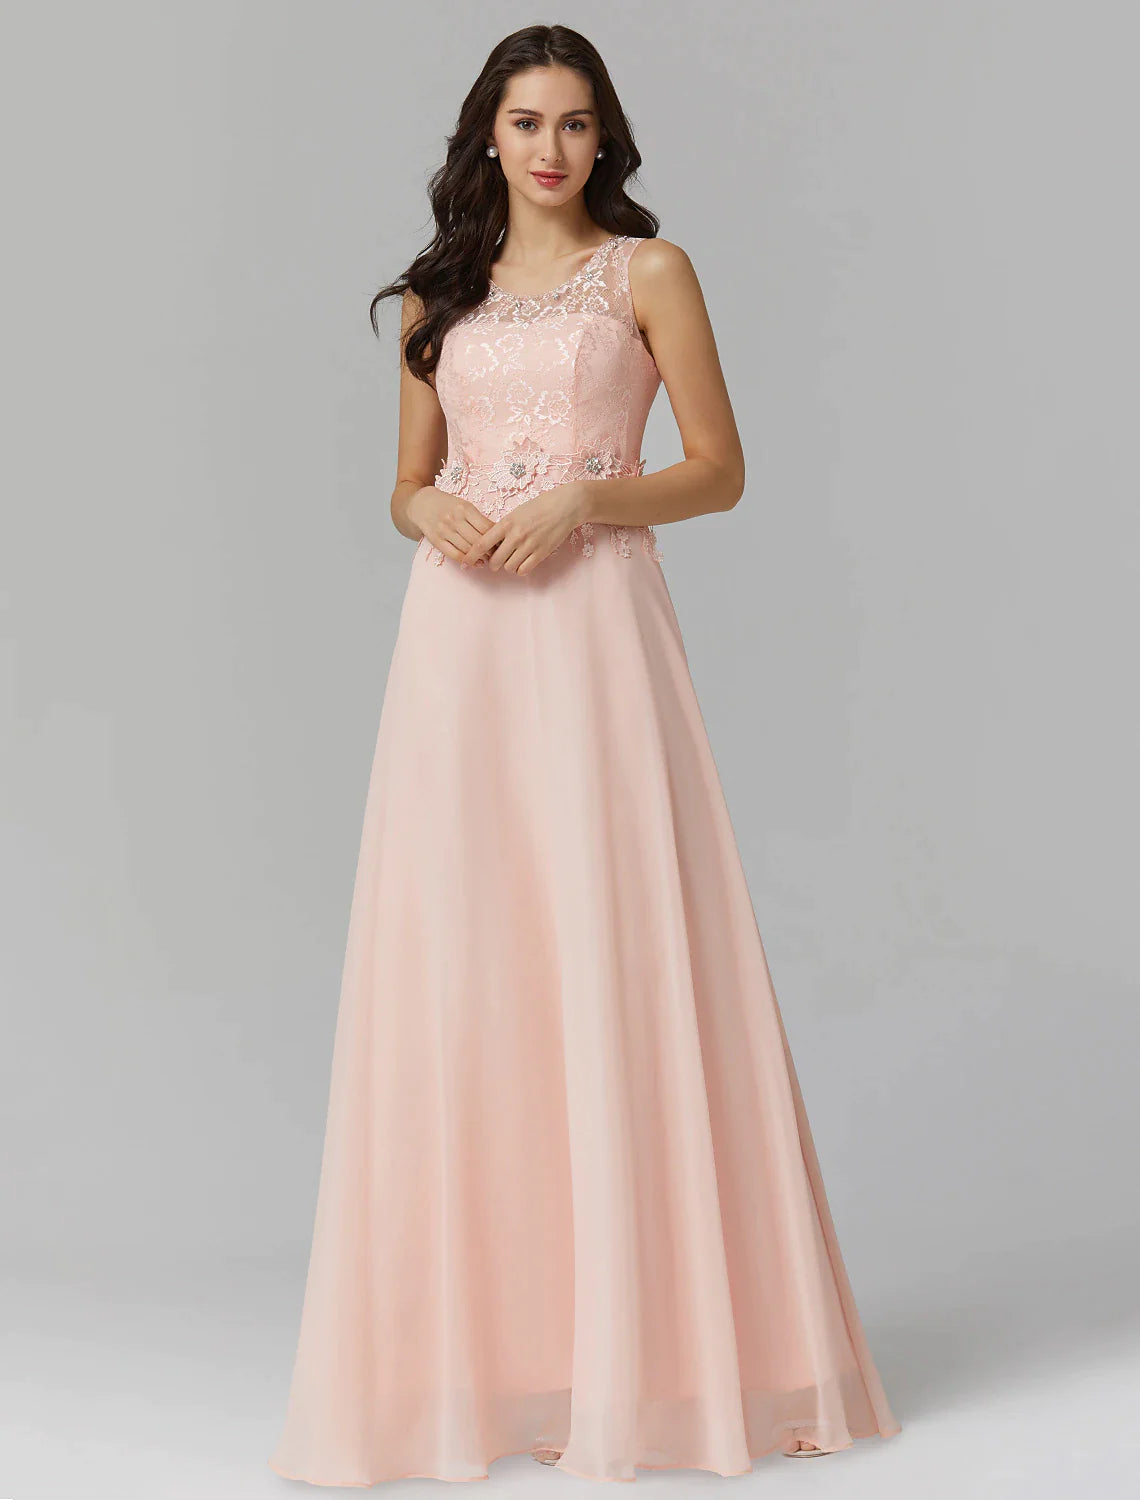 A-Line Empire Dress Valentine's Day Wedding Guest Floor Length Sleeveless Illusion Neck Bridesmaid Dress Chiffon with Beading Appliques